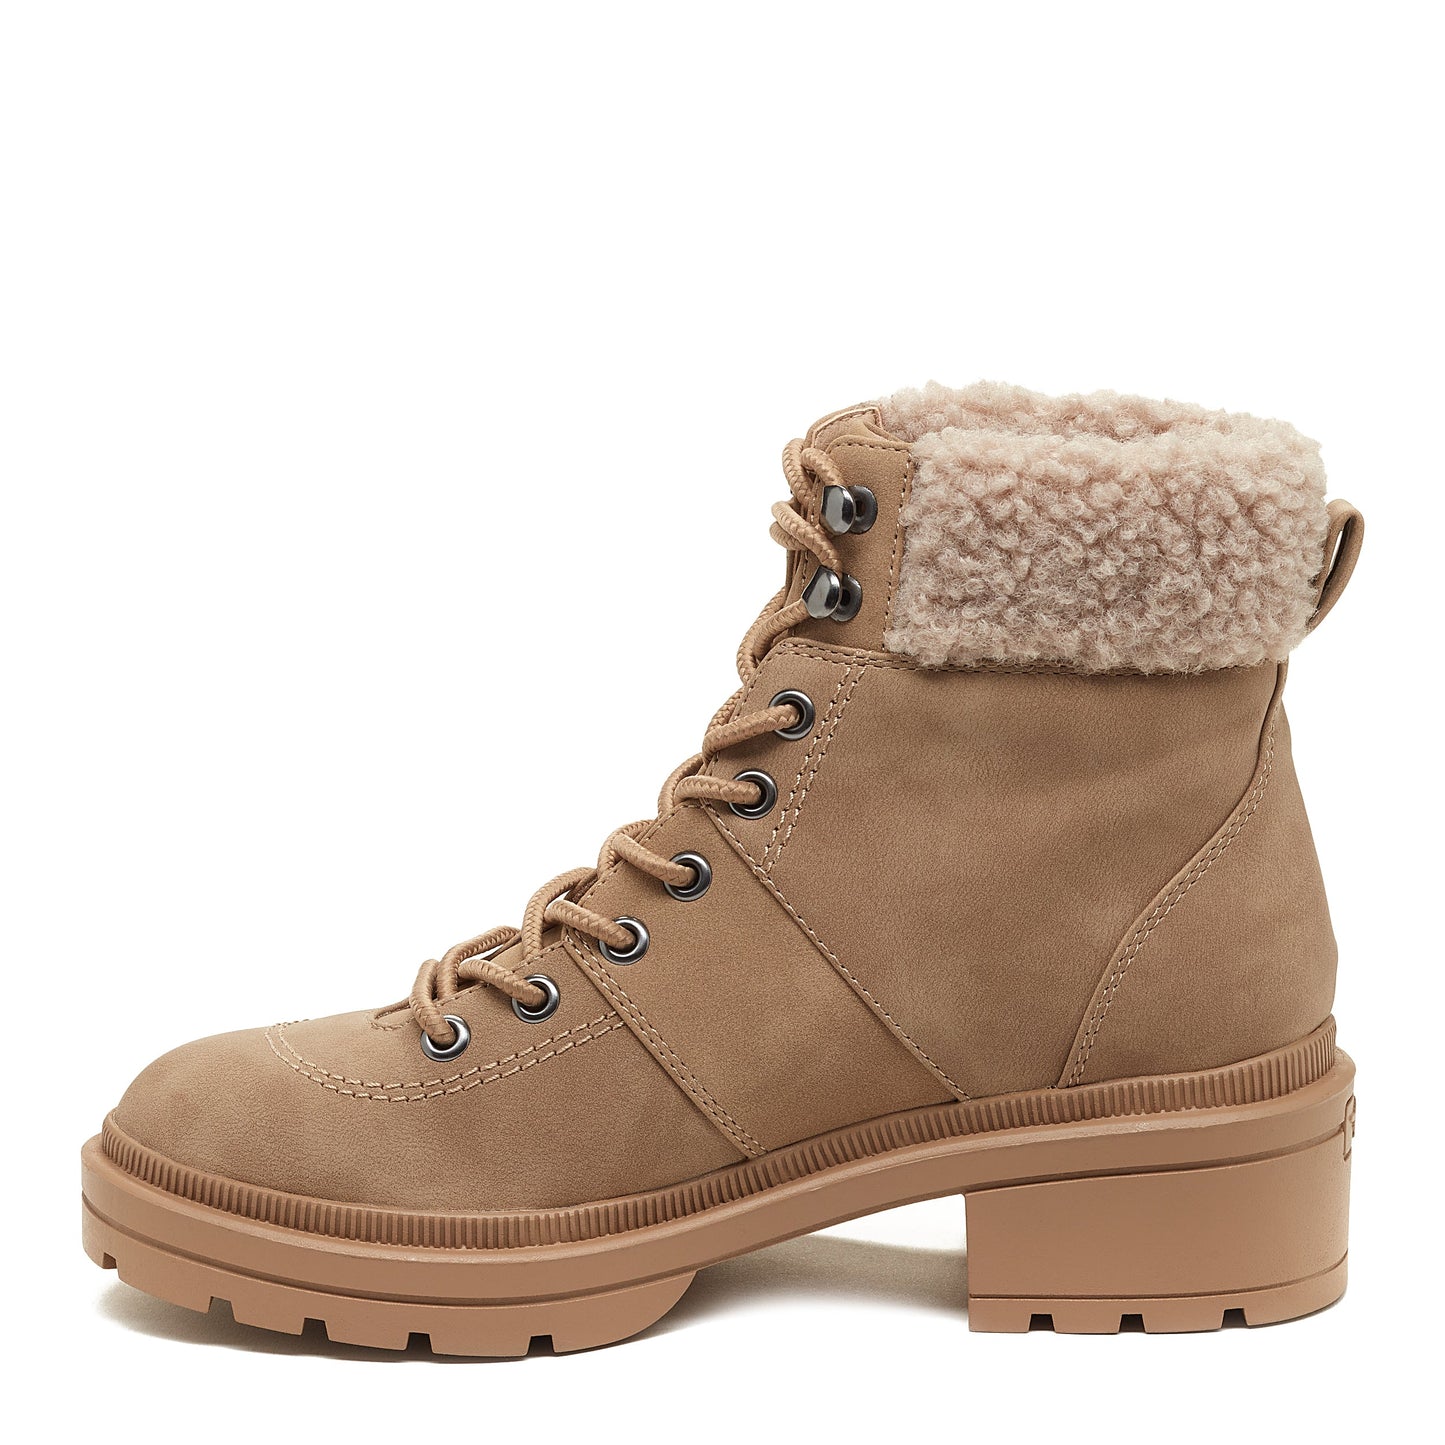 Icy Taupe Shearling Winter Ankle Boot